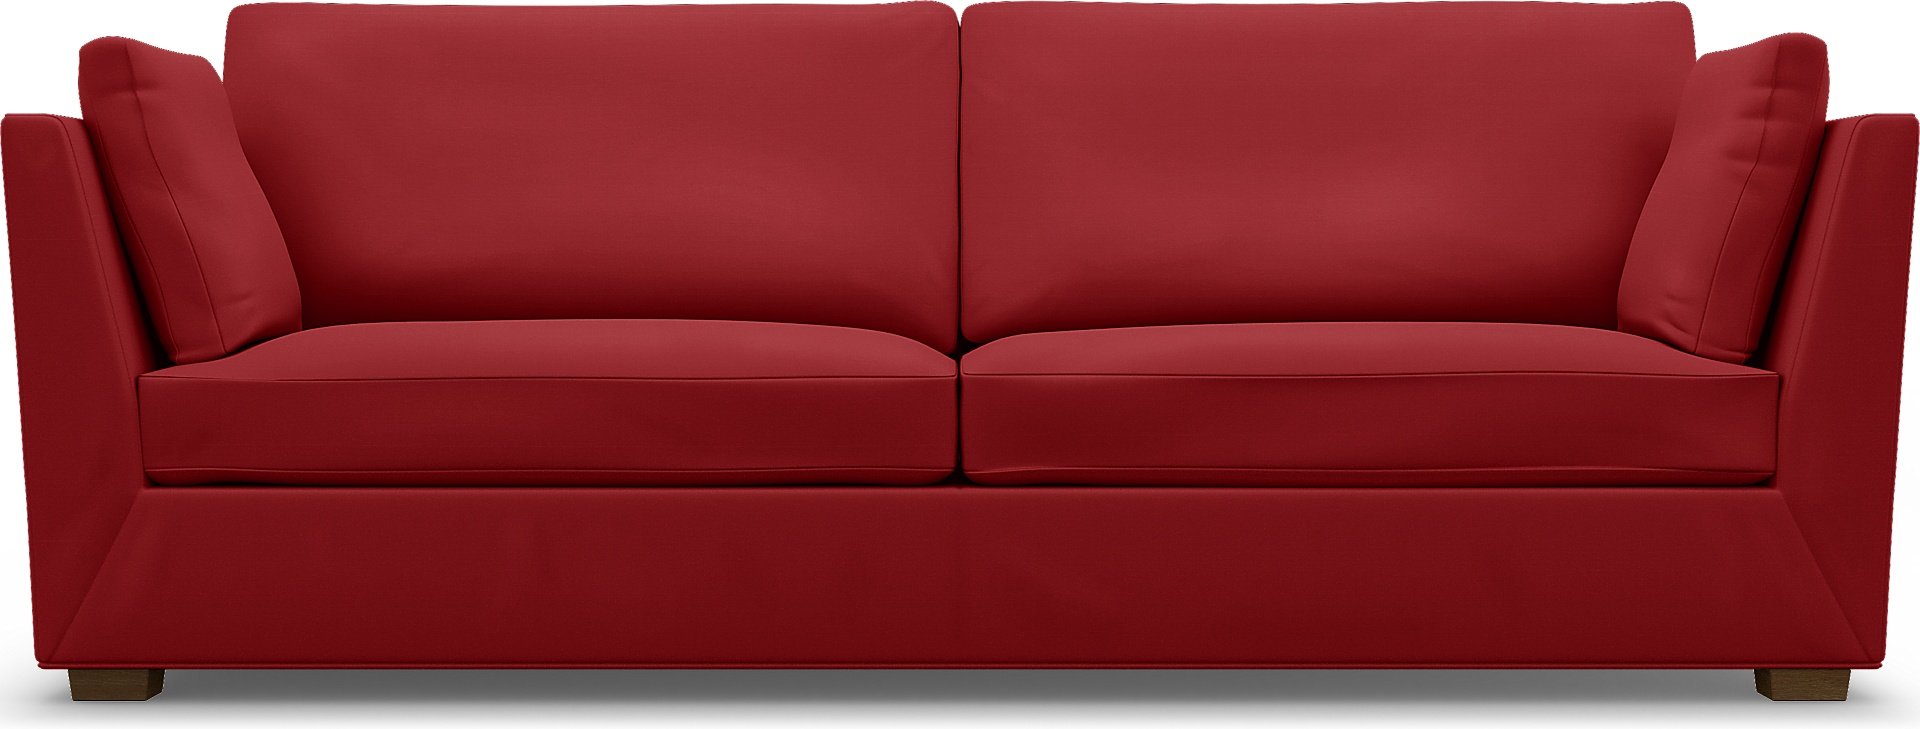 IKEA - Stockholm 3.5 Seater Sofa Cover, Scarlet Red, Cotton - Bemz